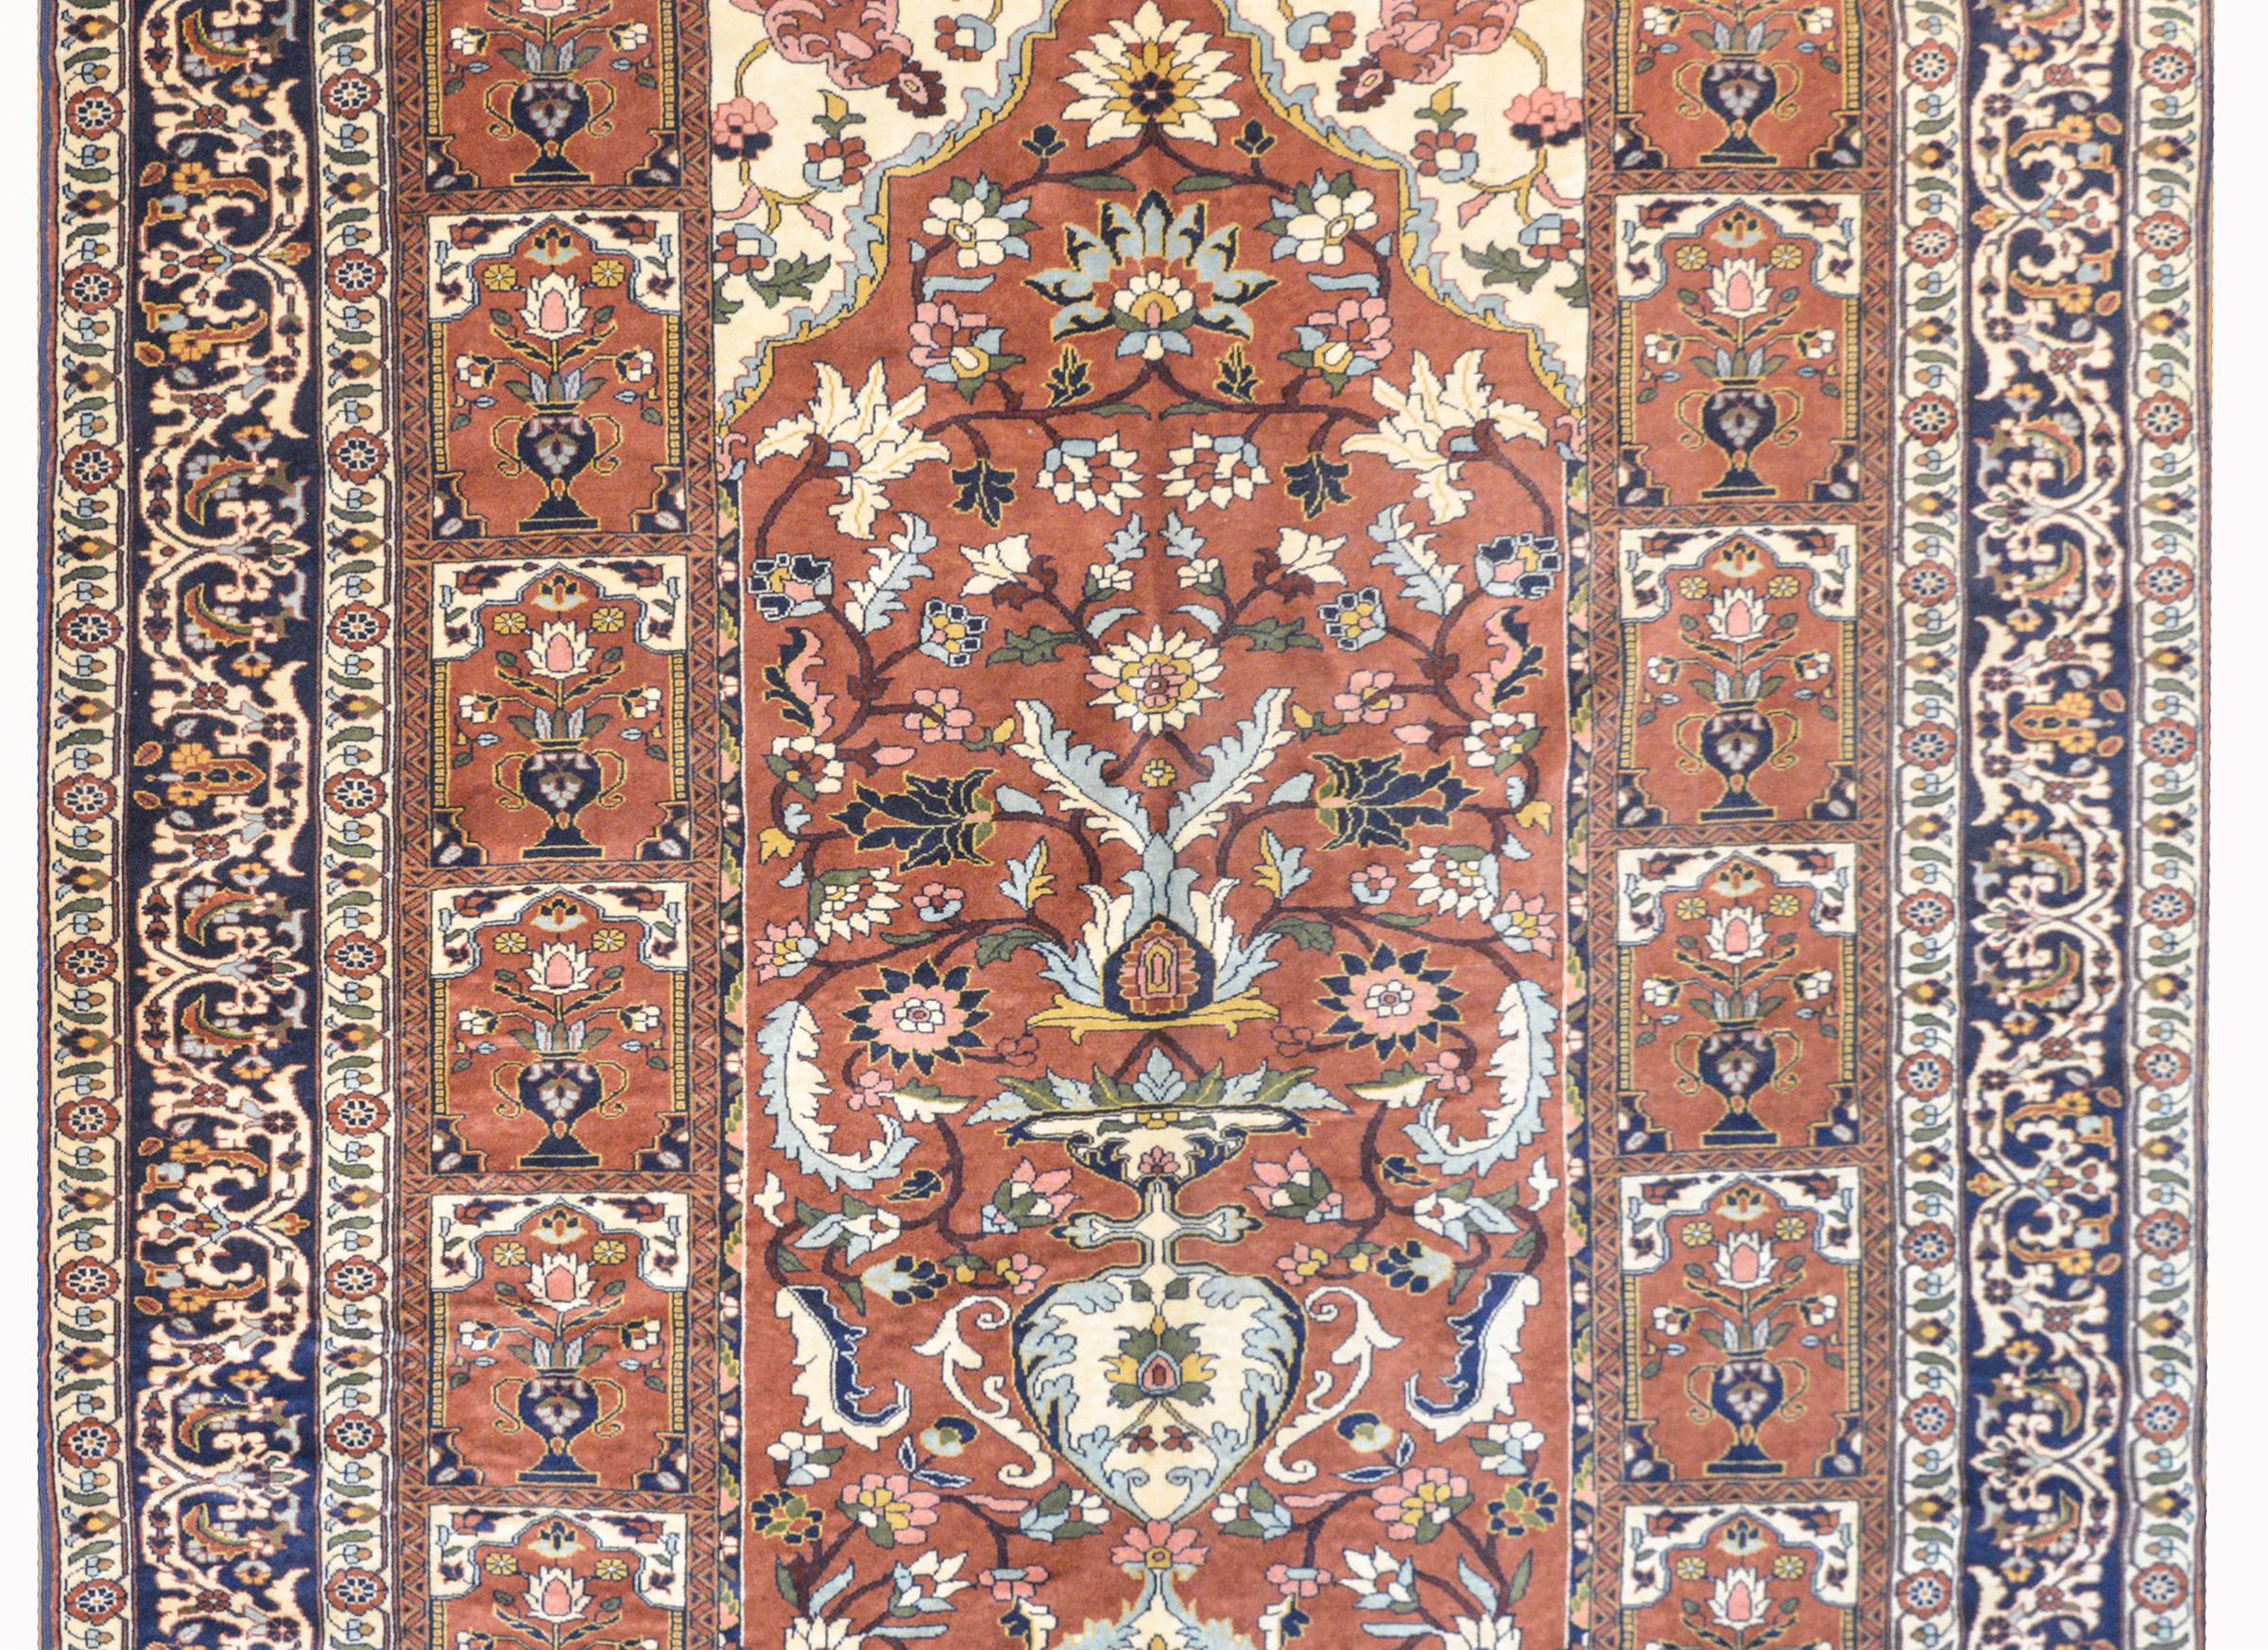 A wonderful vintage Sarakhs rug with a beautiful large patted tree-of-life in the center, surrounded by multiple smaller potted trees-of-life, all woven in rich golds, indigos, pinks, cranberries, and creams. The border is composed of multiple